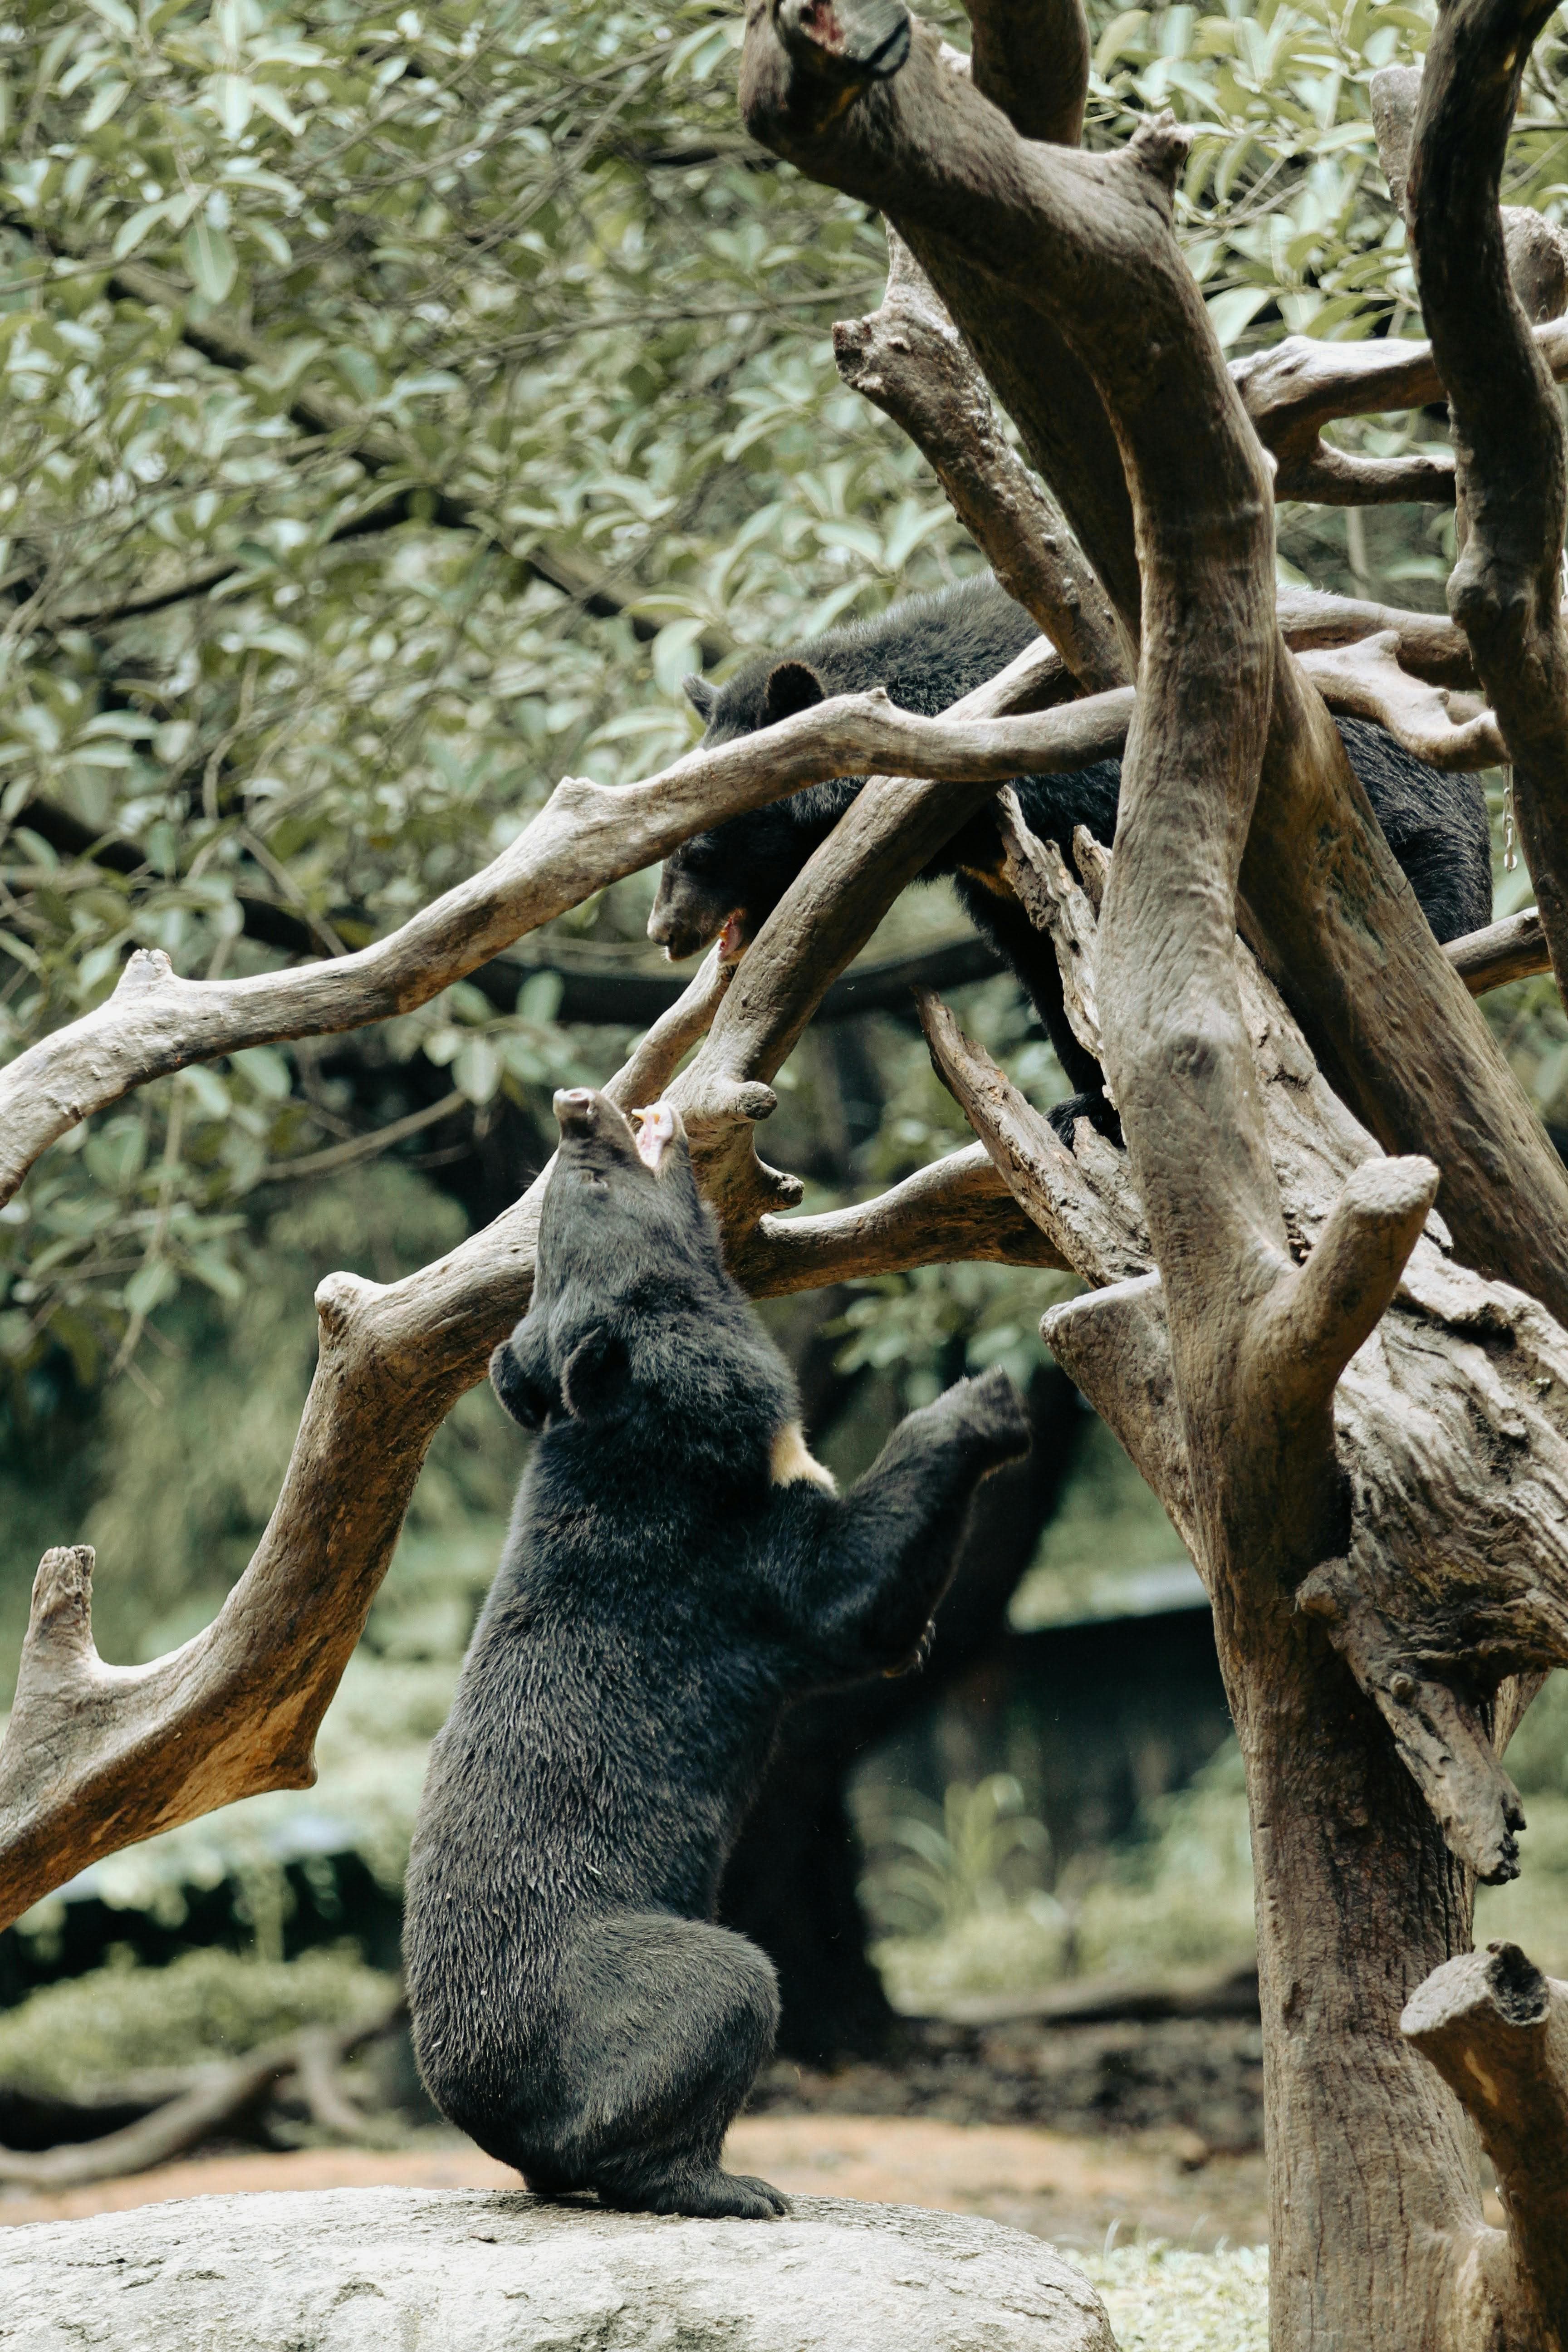 A spectacled bear climbs on a gnarled tree trunk in its enclosure.